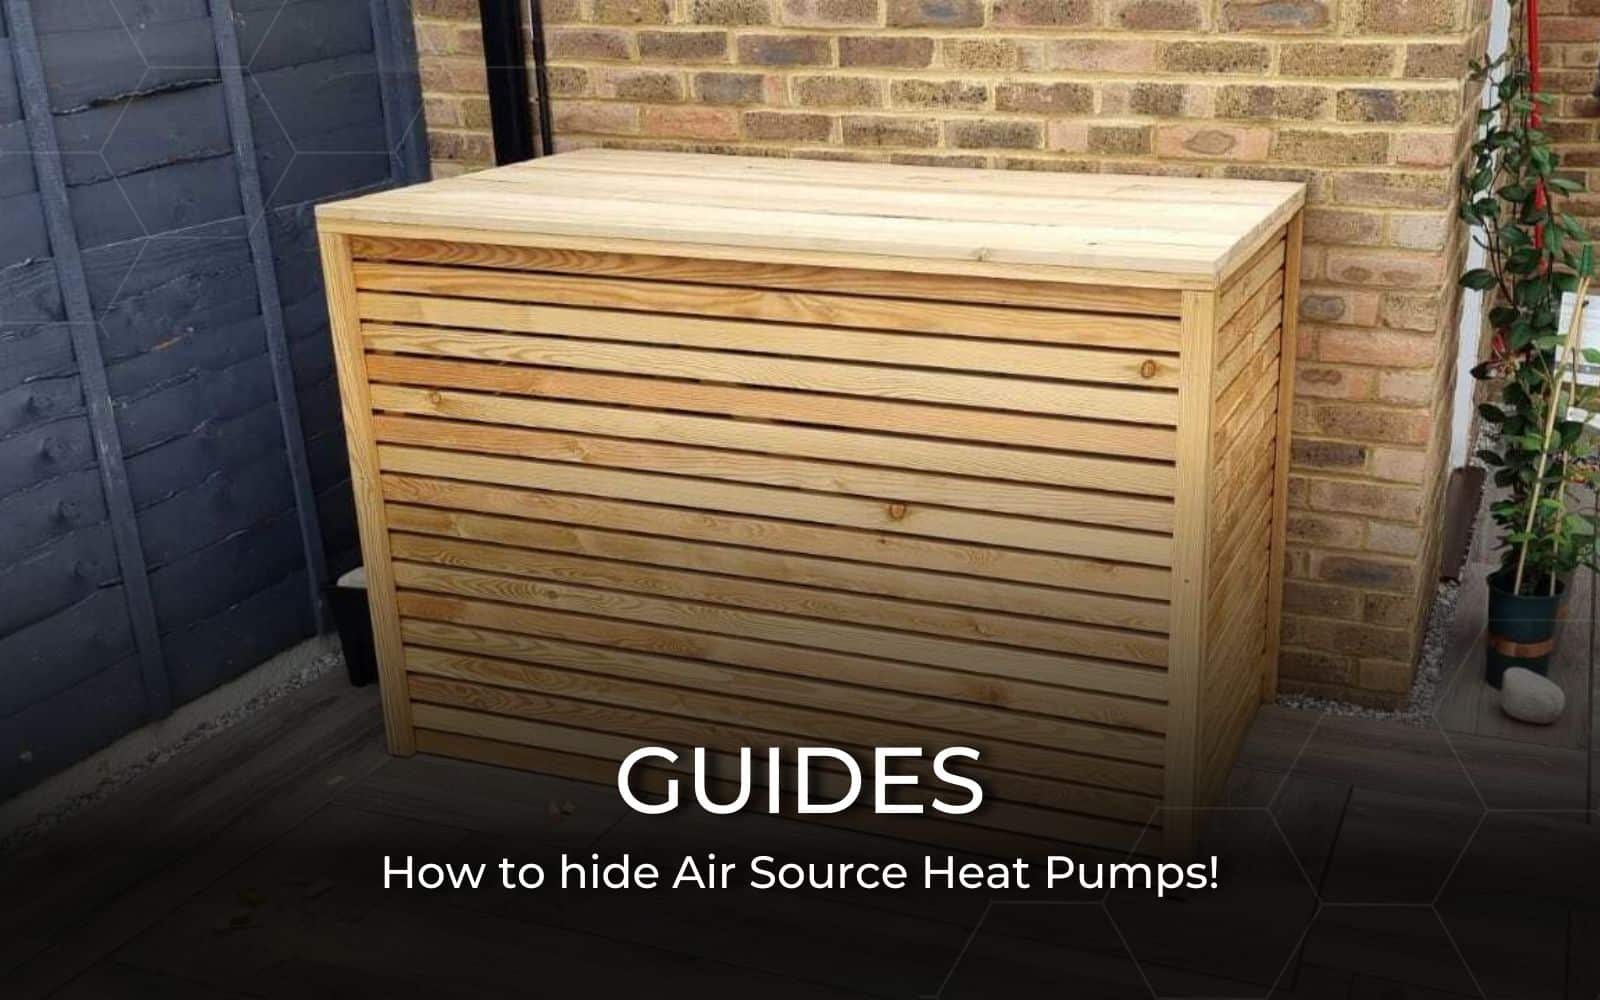 How to hide air source heat pumps?